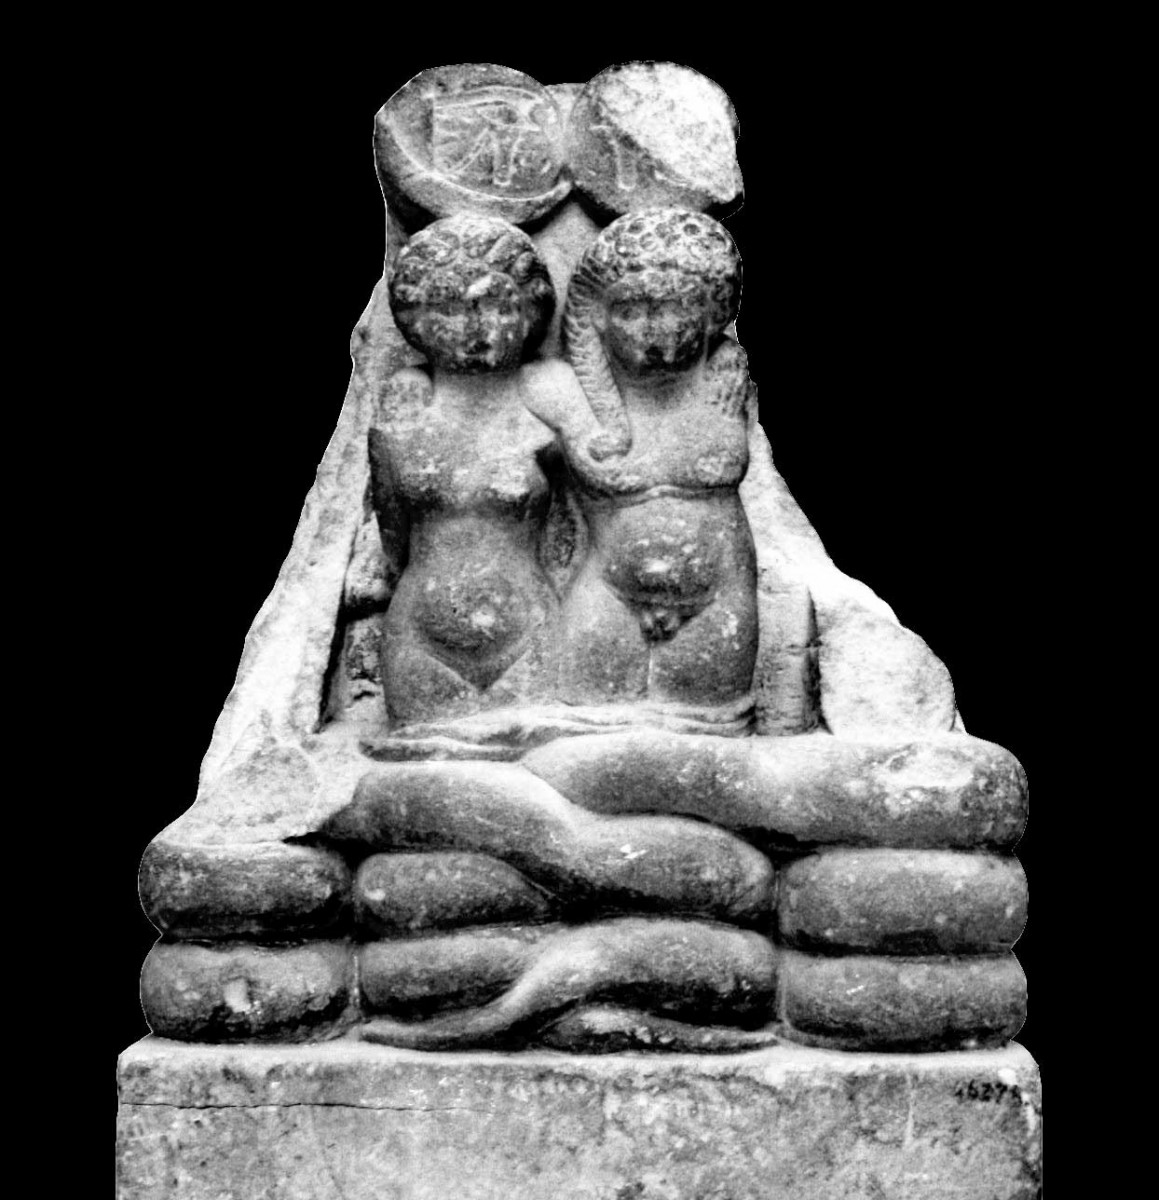 Cleopatra's twin children, Alexander Helios and Cleopatra Selene have been possibly identified in this sandstone sculpture. 